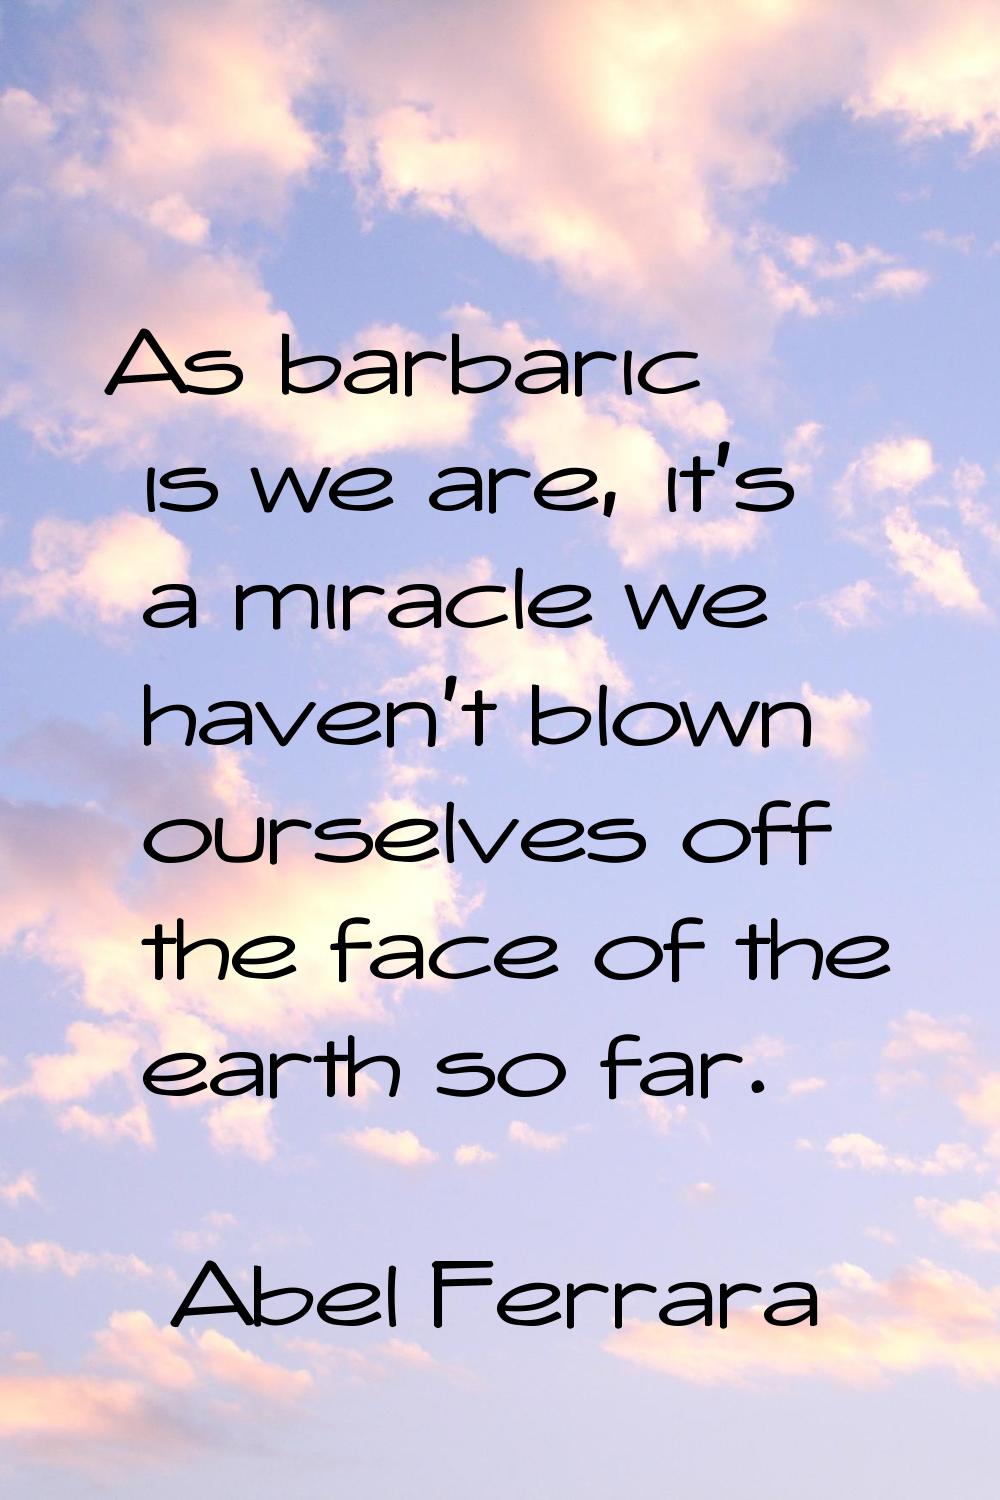 As barbaric is we are, it's a miracle we haven't blown ourselves off the face of the earth so far.